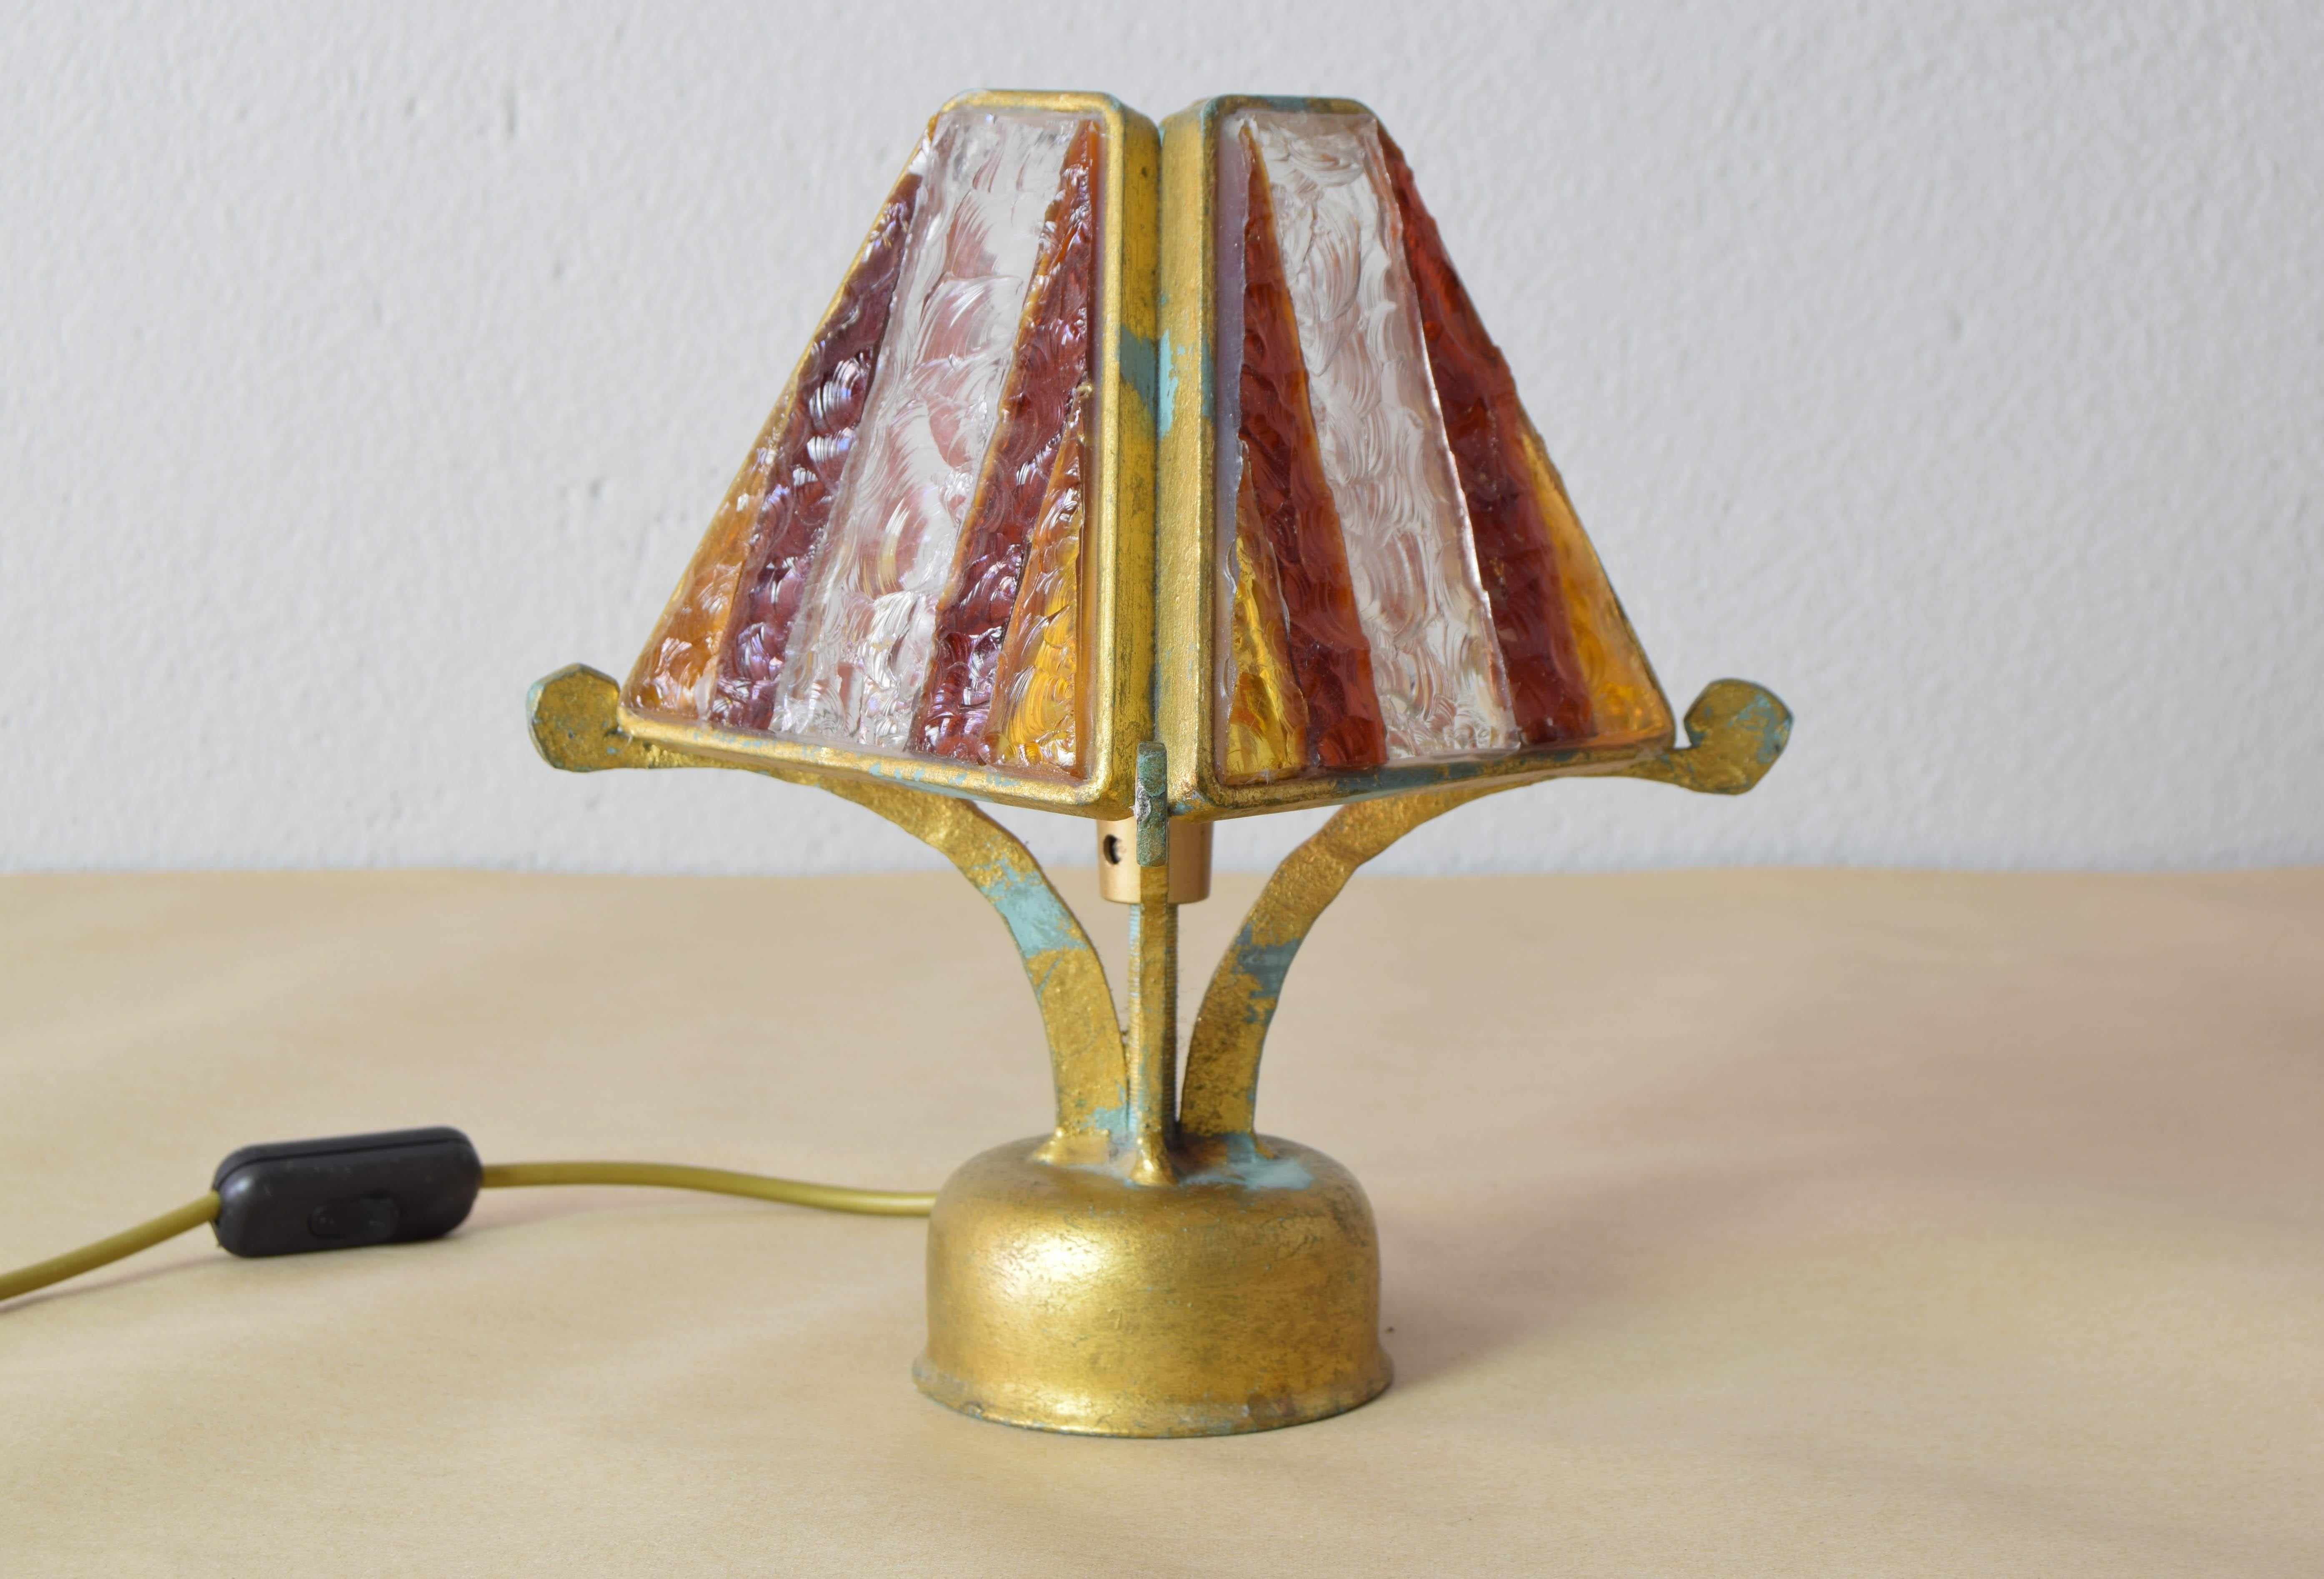 Small and exquisite Brutalist Longobard handmade table lamp from the Daly collection.
Special piece with character that will allow you to provide a jewel to your space.
Handmade wrought iron structure covered in old French gold.
His multicolored